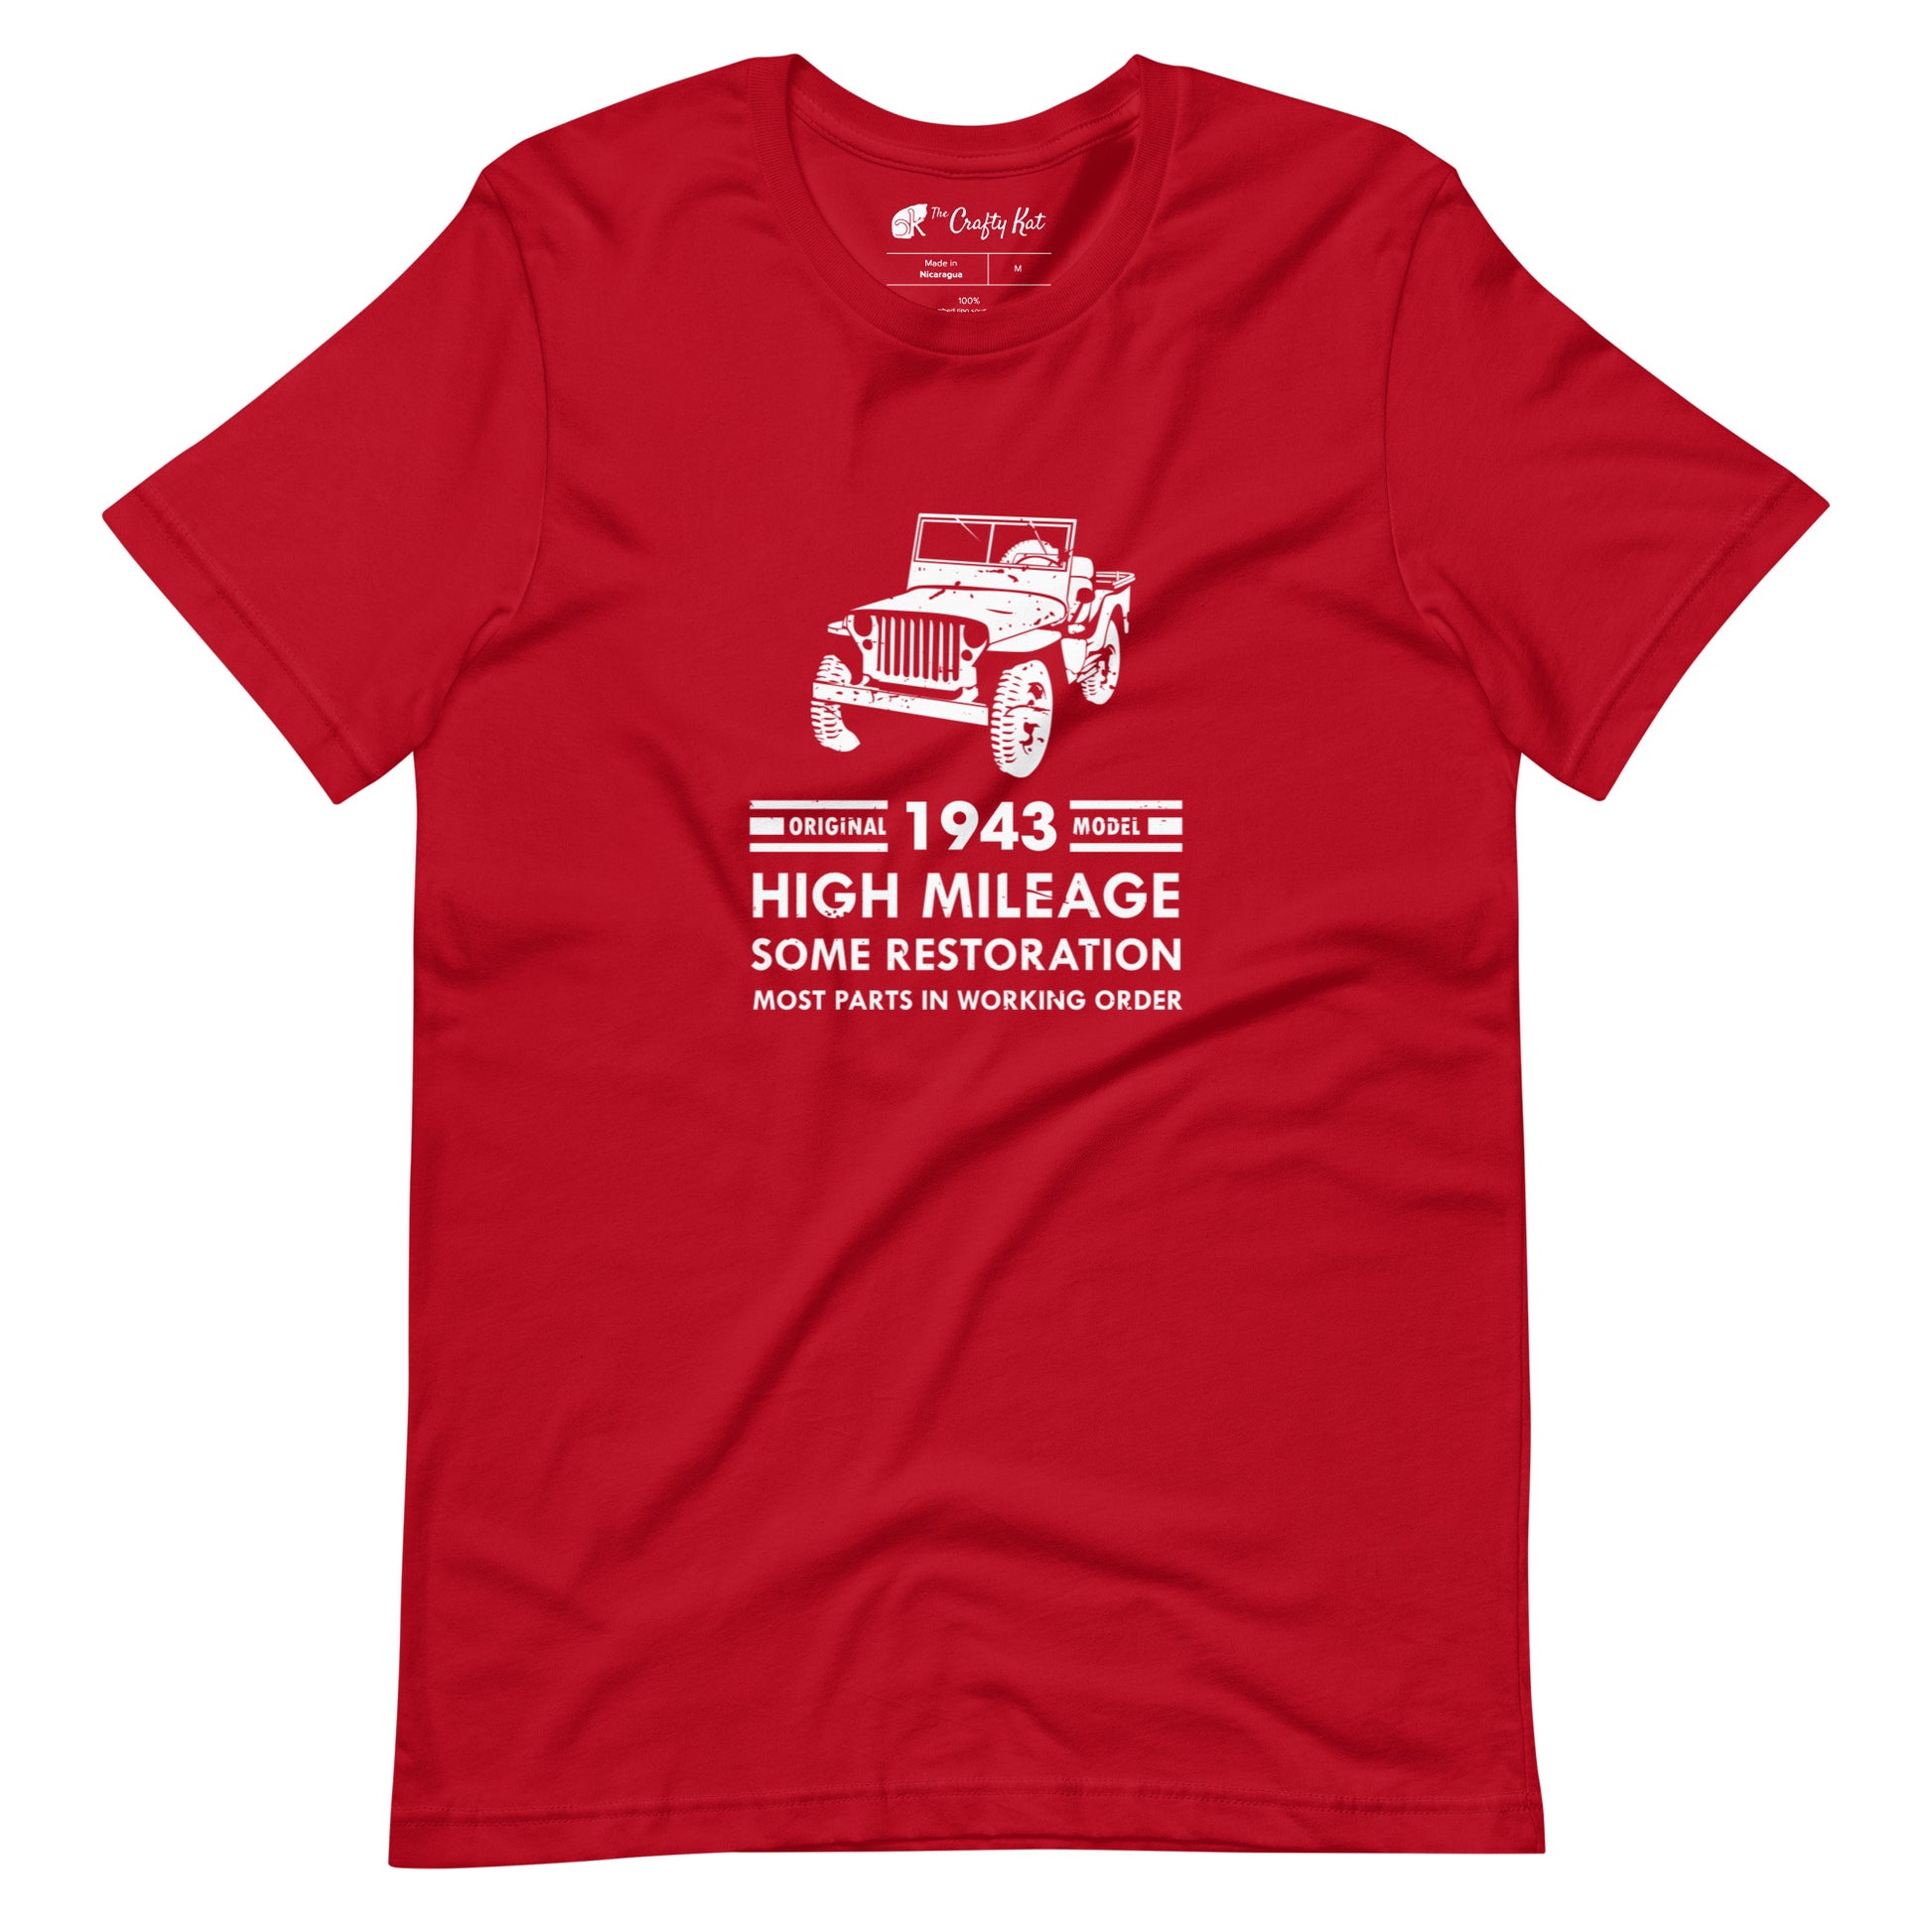 Red t-shirt with distressed graphic of old military jeep and text "Original YEAR model HIGH MILEAGE some restoration MOST PARTS IN WORKING ORDER"